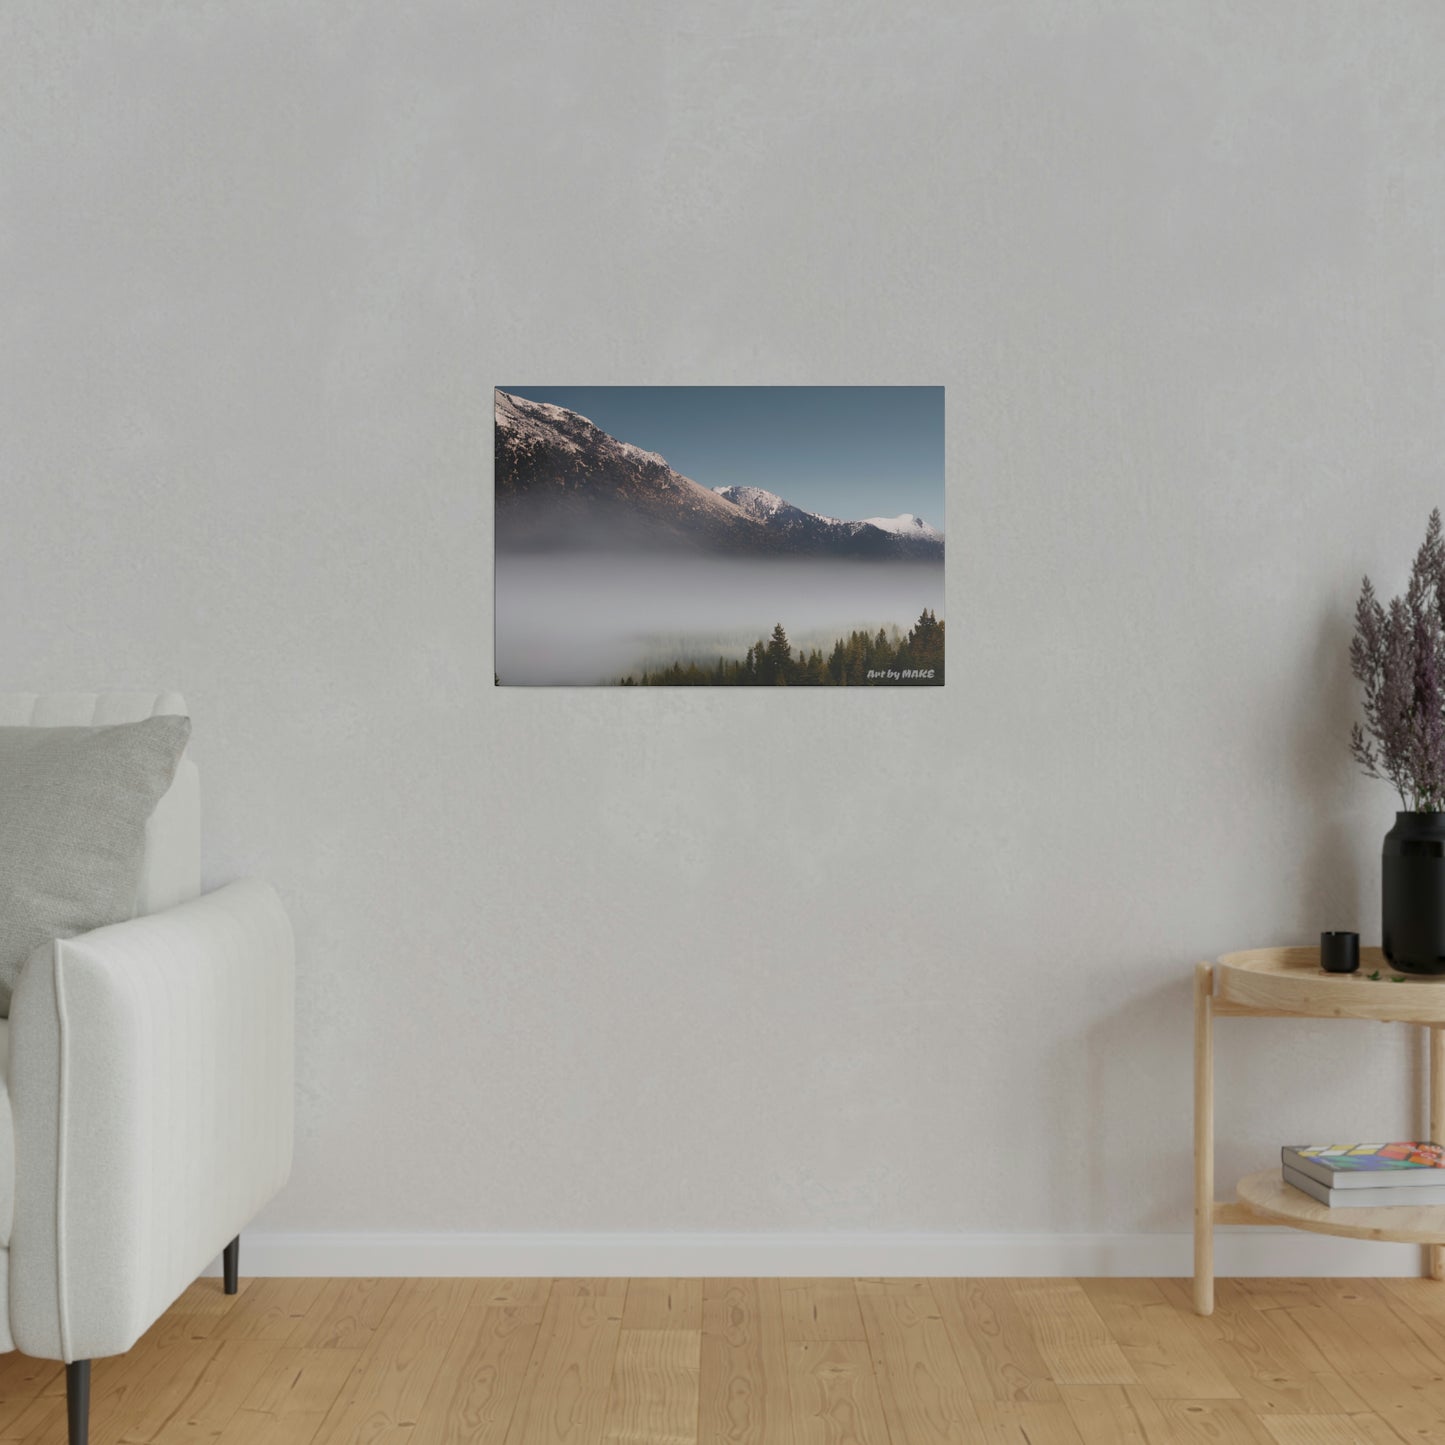 American Mountains 1 - 24"x16" Matte Canvas, Stretched, 0.75"